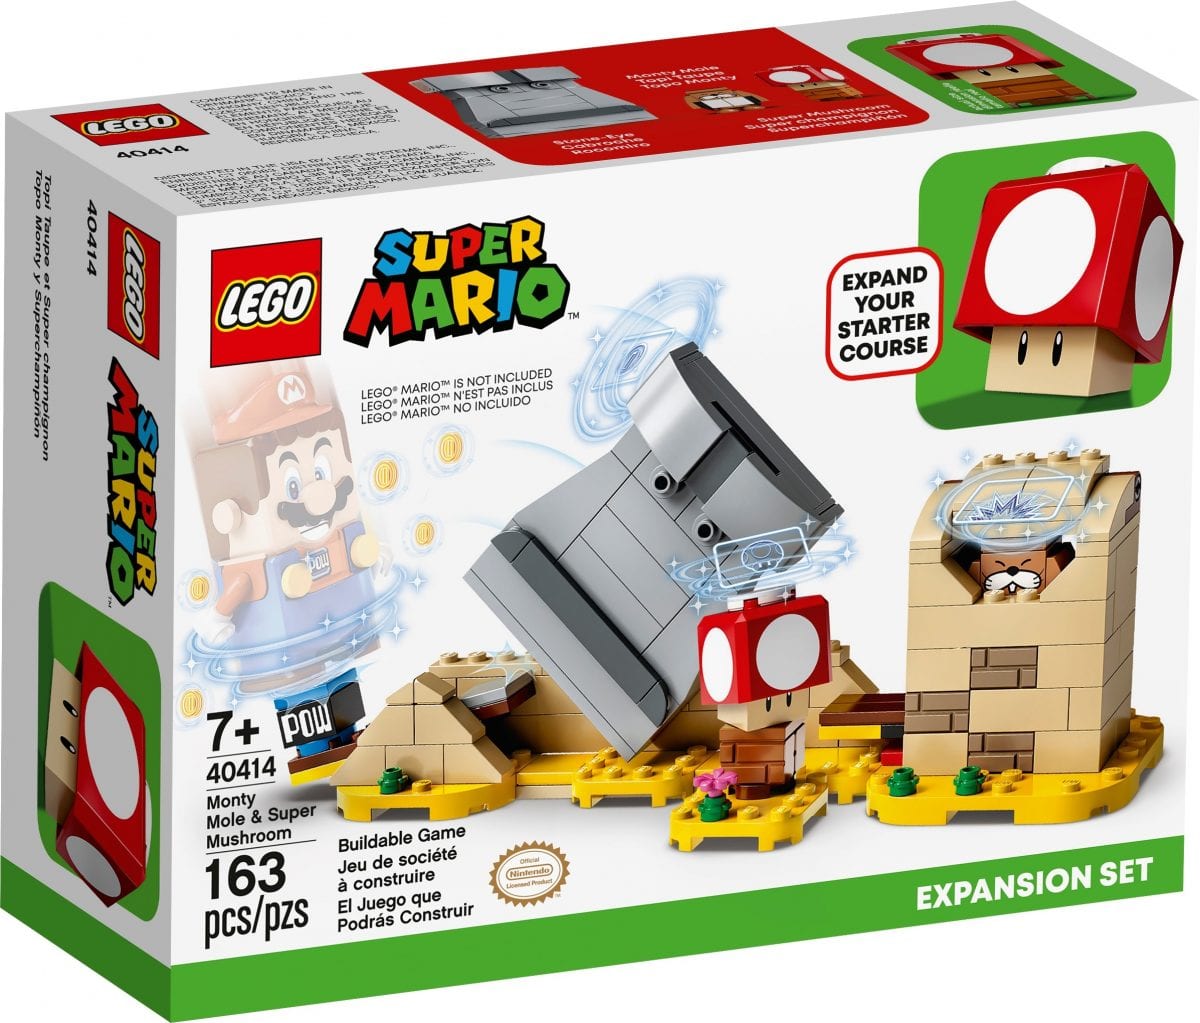 LEGO Super Mario Bros. Character Packs Expansion